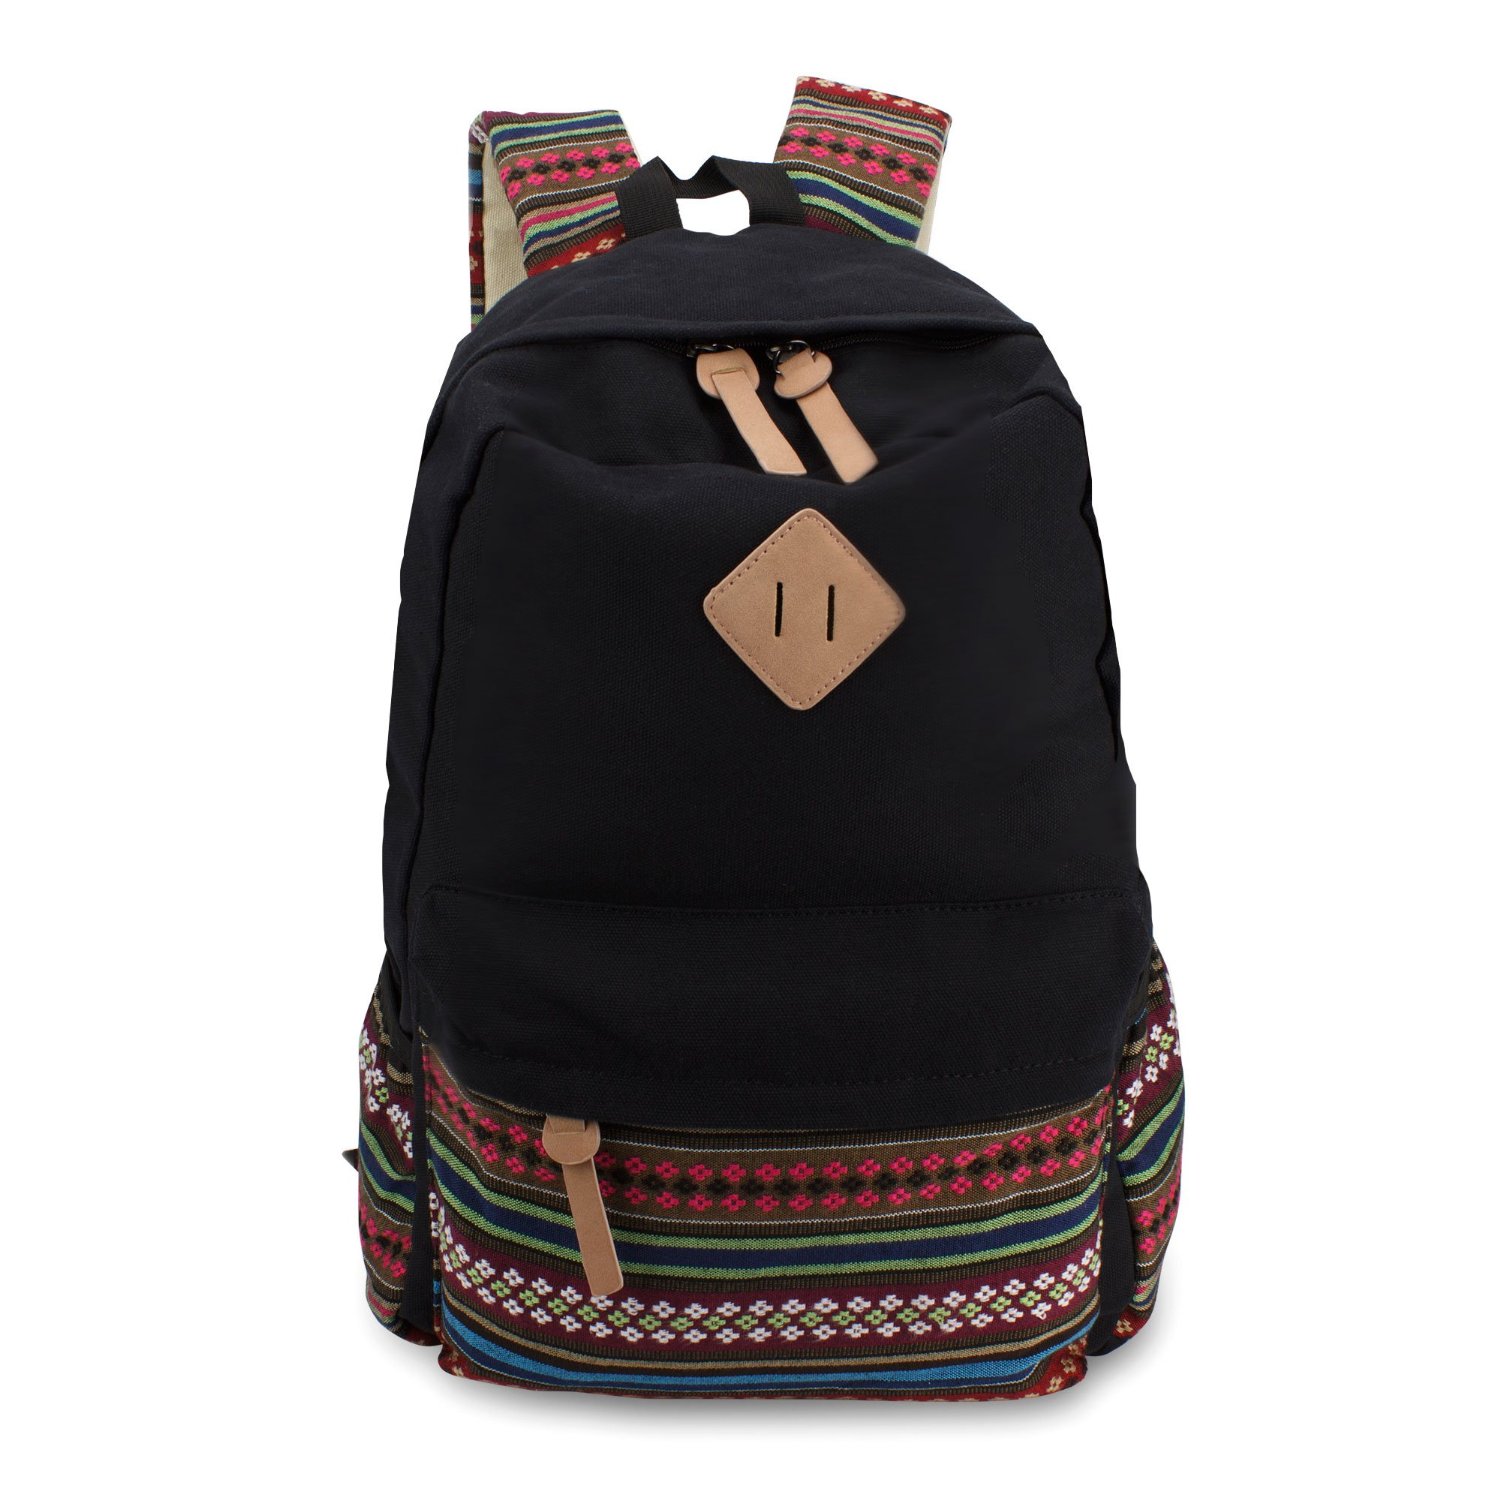 Most Comfortable Backpacks For College Students : Best Stylish Backpacks For College Girls With ...